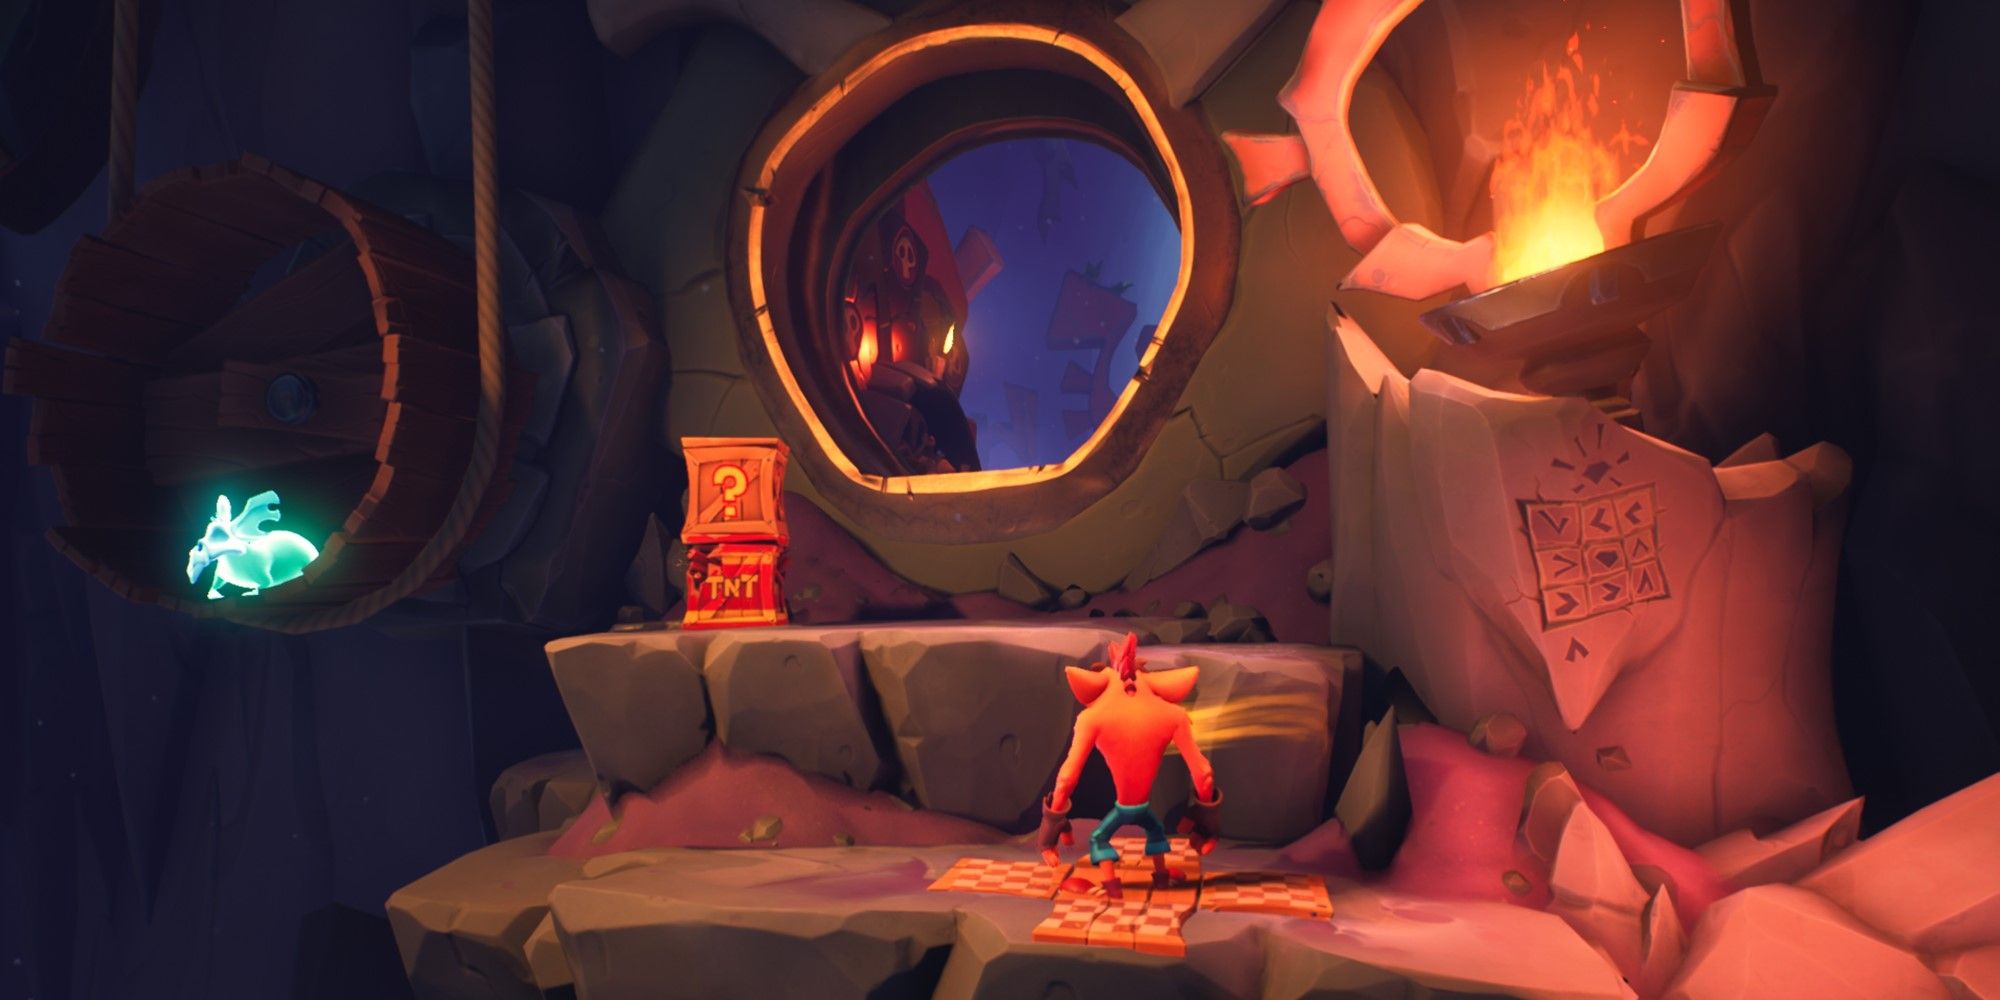 How to Find the Gem Location in Crash Bandicoot 4